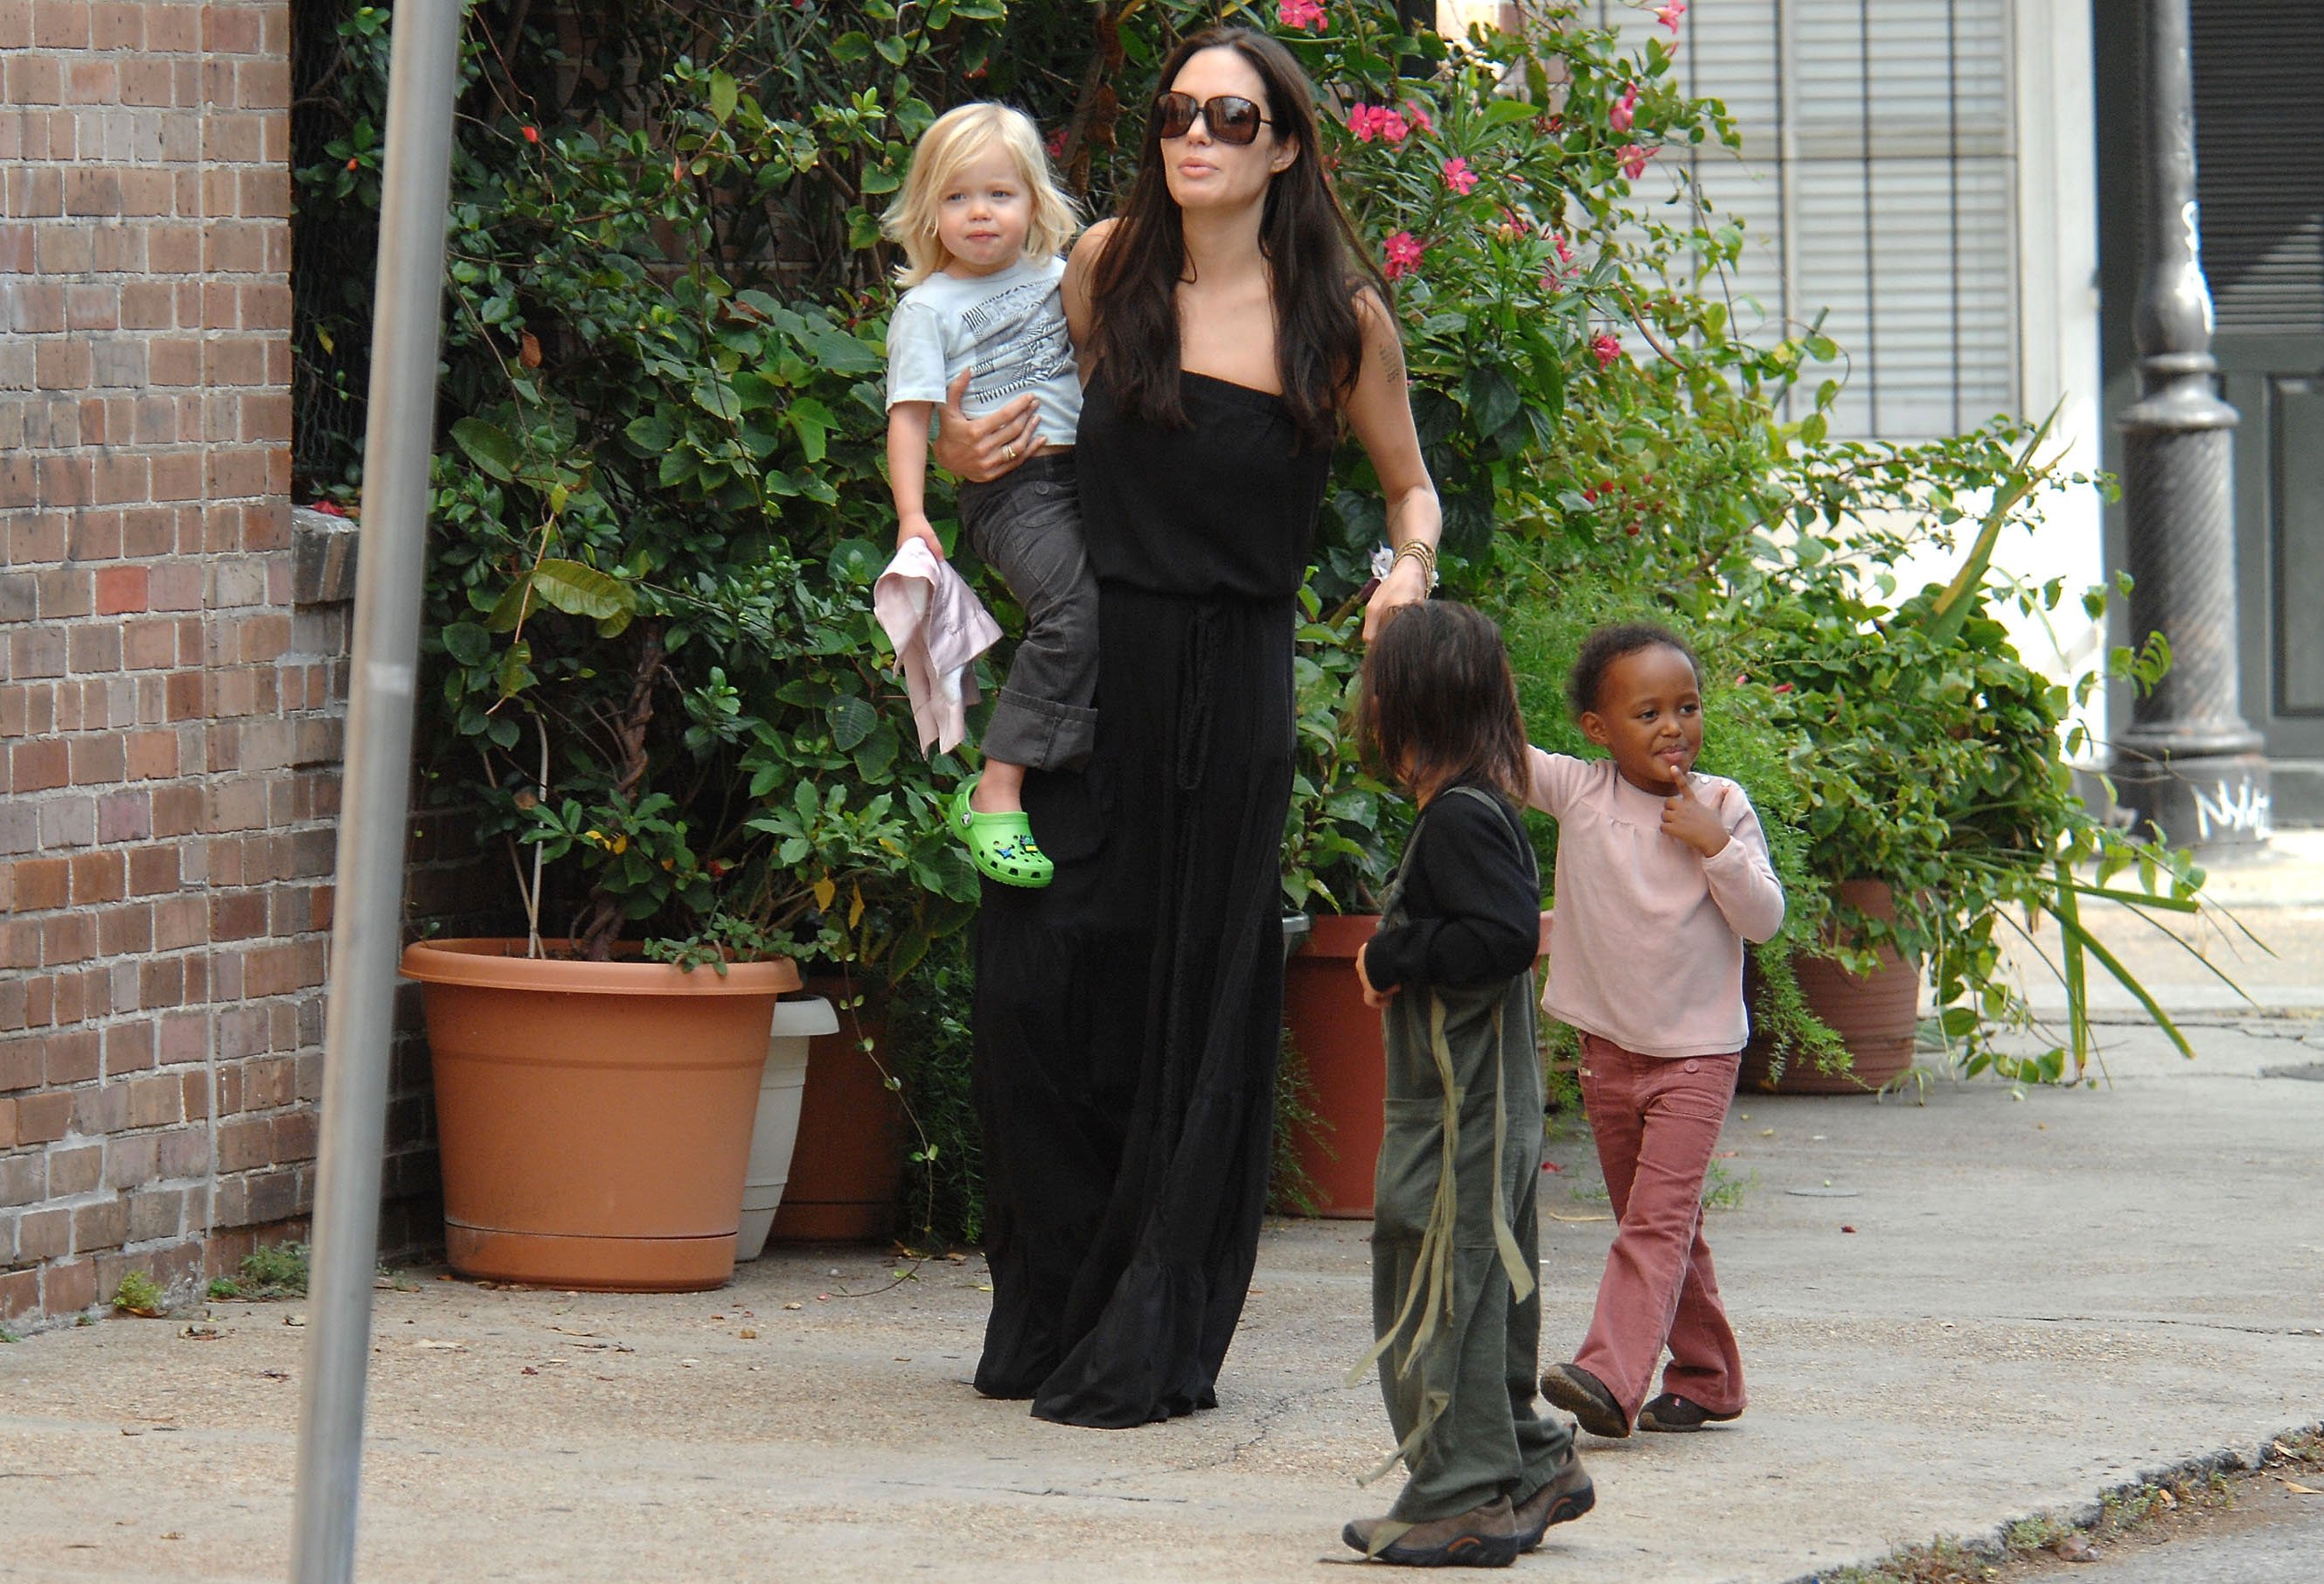 Actress Angelina Jolie and her children Zahara, Pax, and Shiloh are seen walking in the French Quarter on October 6, 2008 in New Orleans, Louisiana | Source: Getty Images